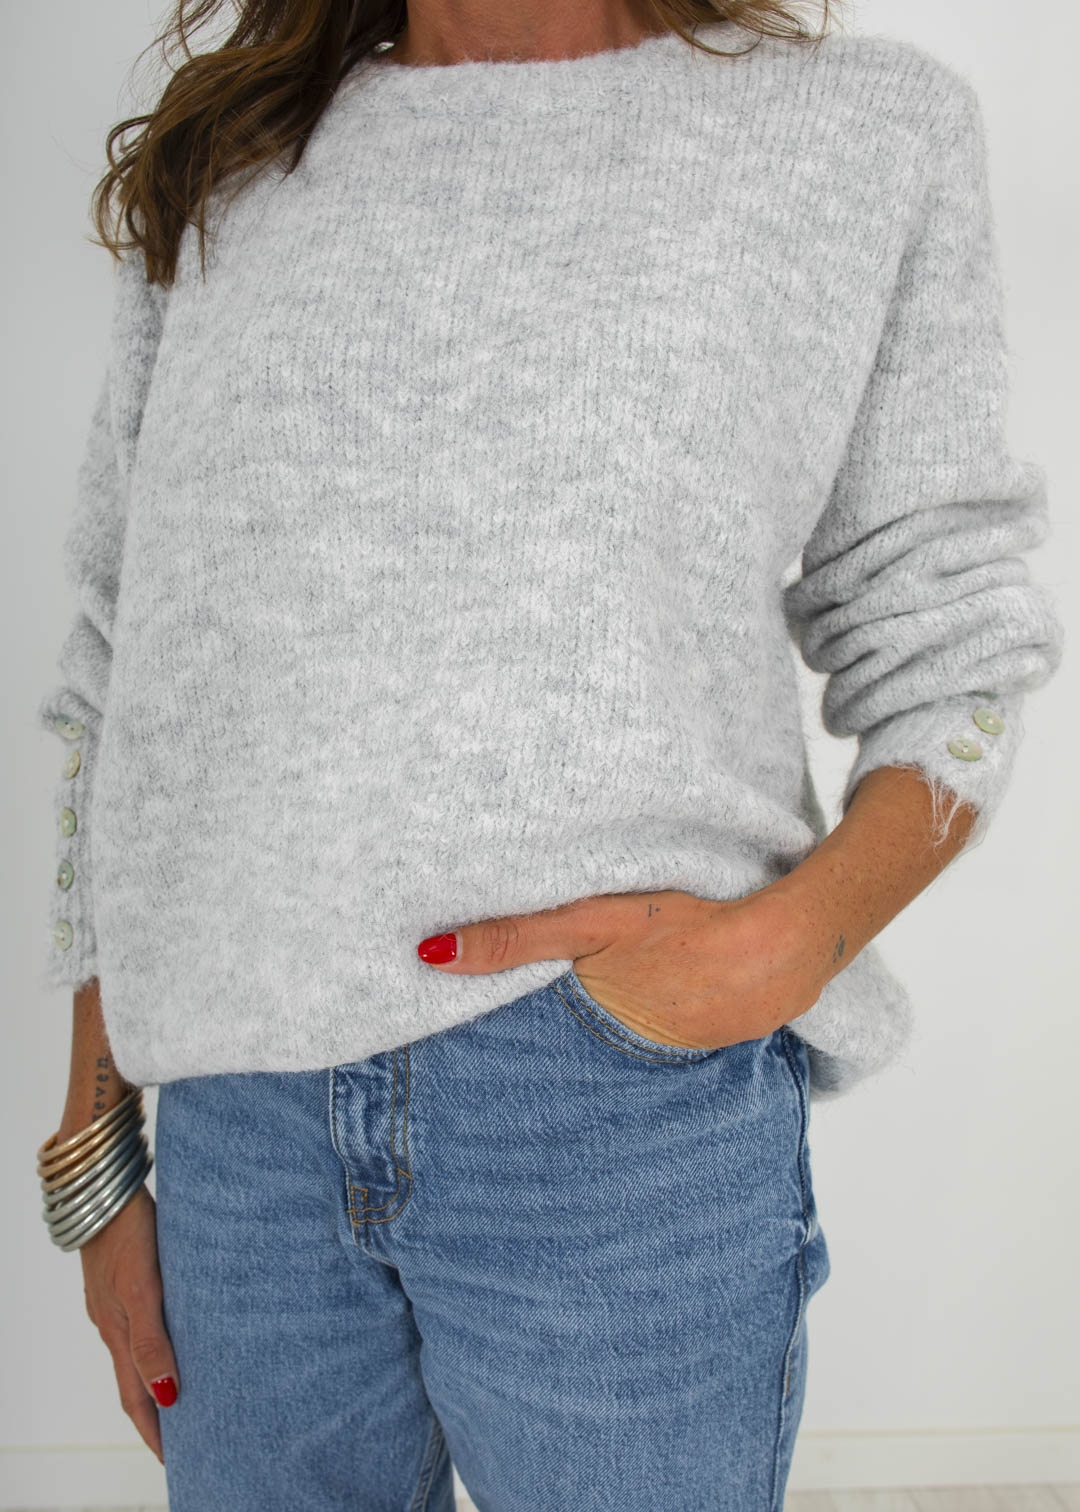 GREY BUTTON SLEEVE SWEATER